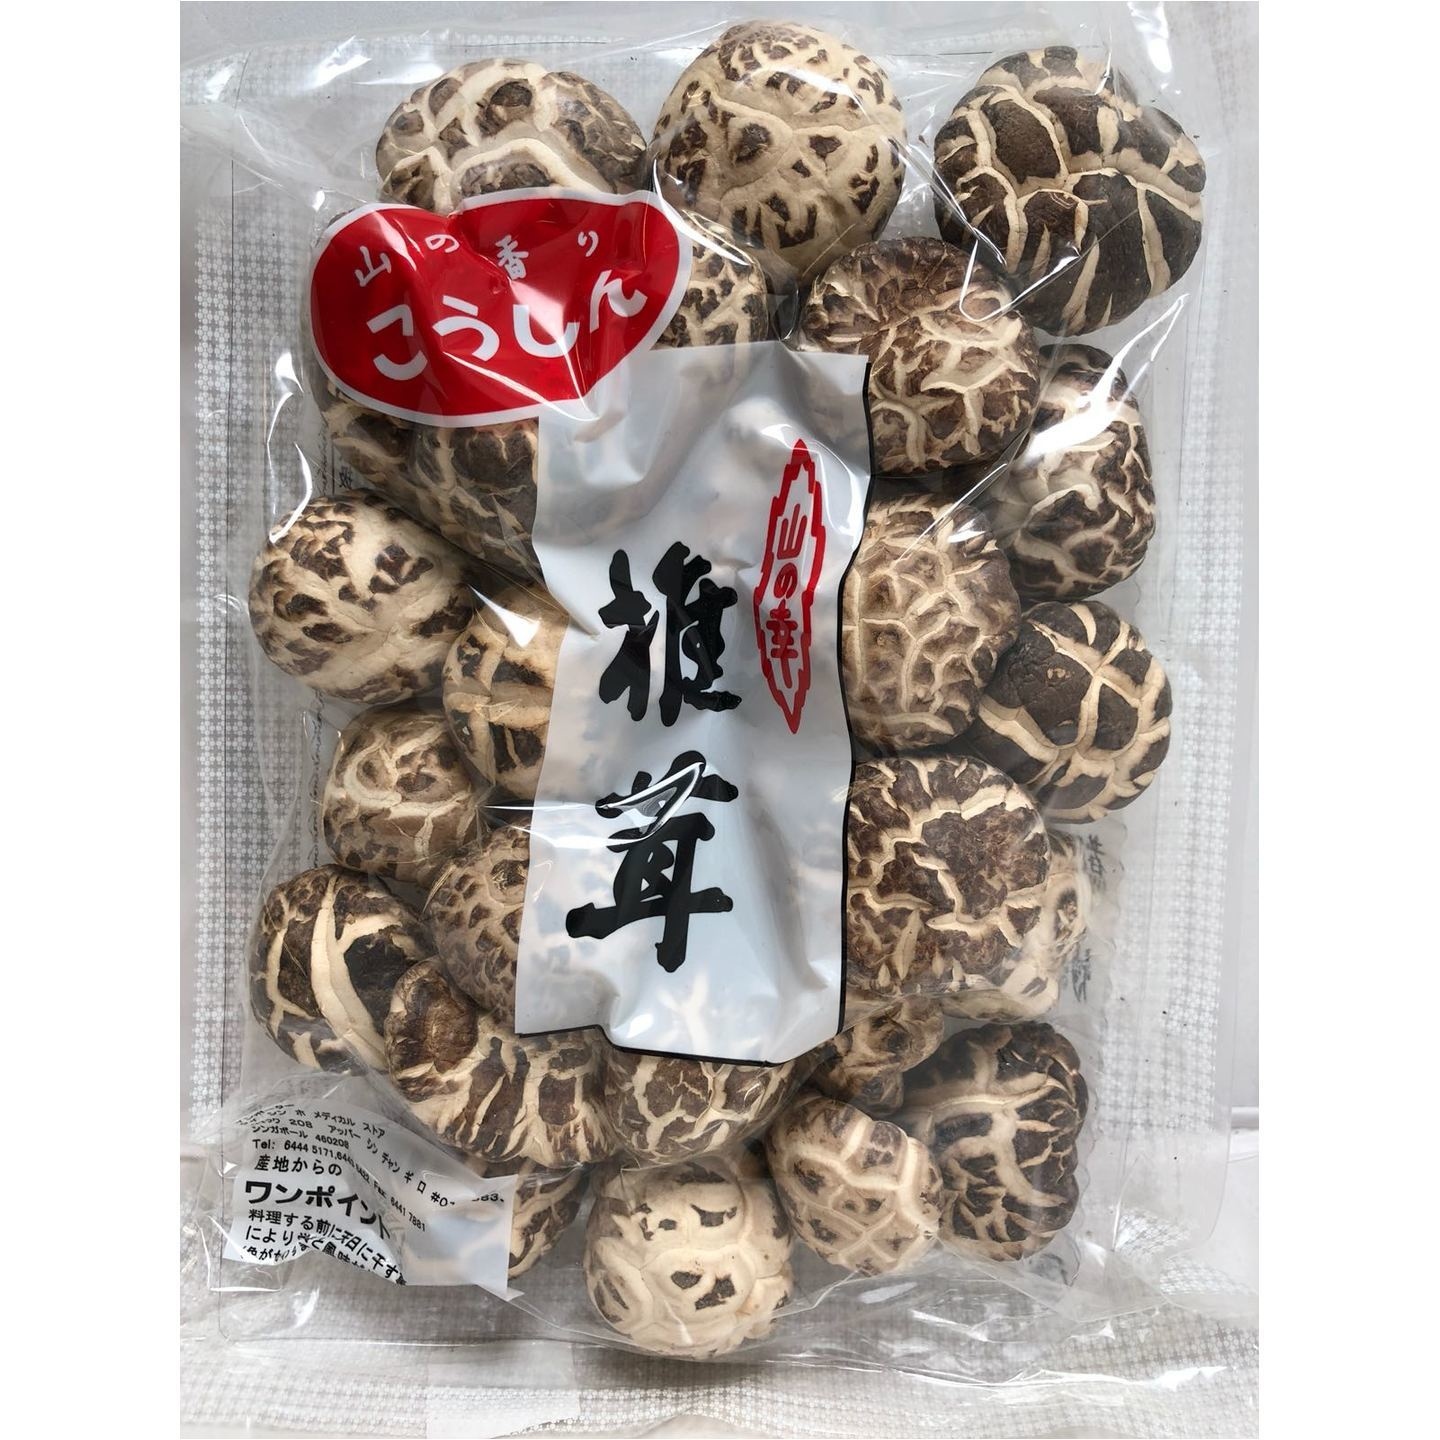 Vacuum-Packed Japanese Dried Mushroom 300g can mix & match with box